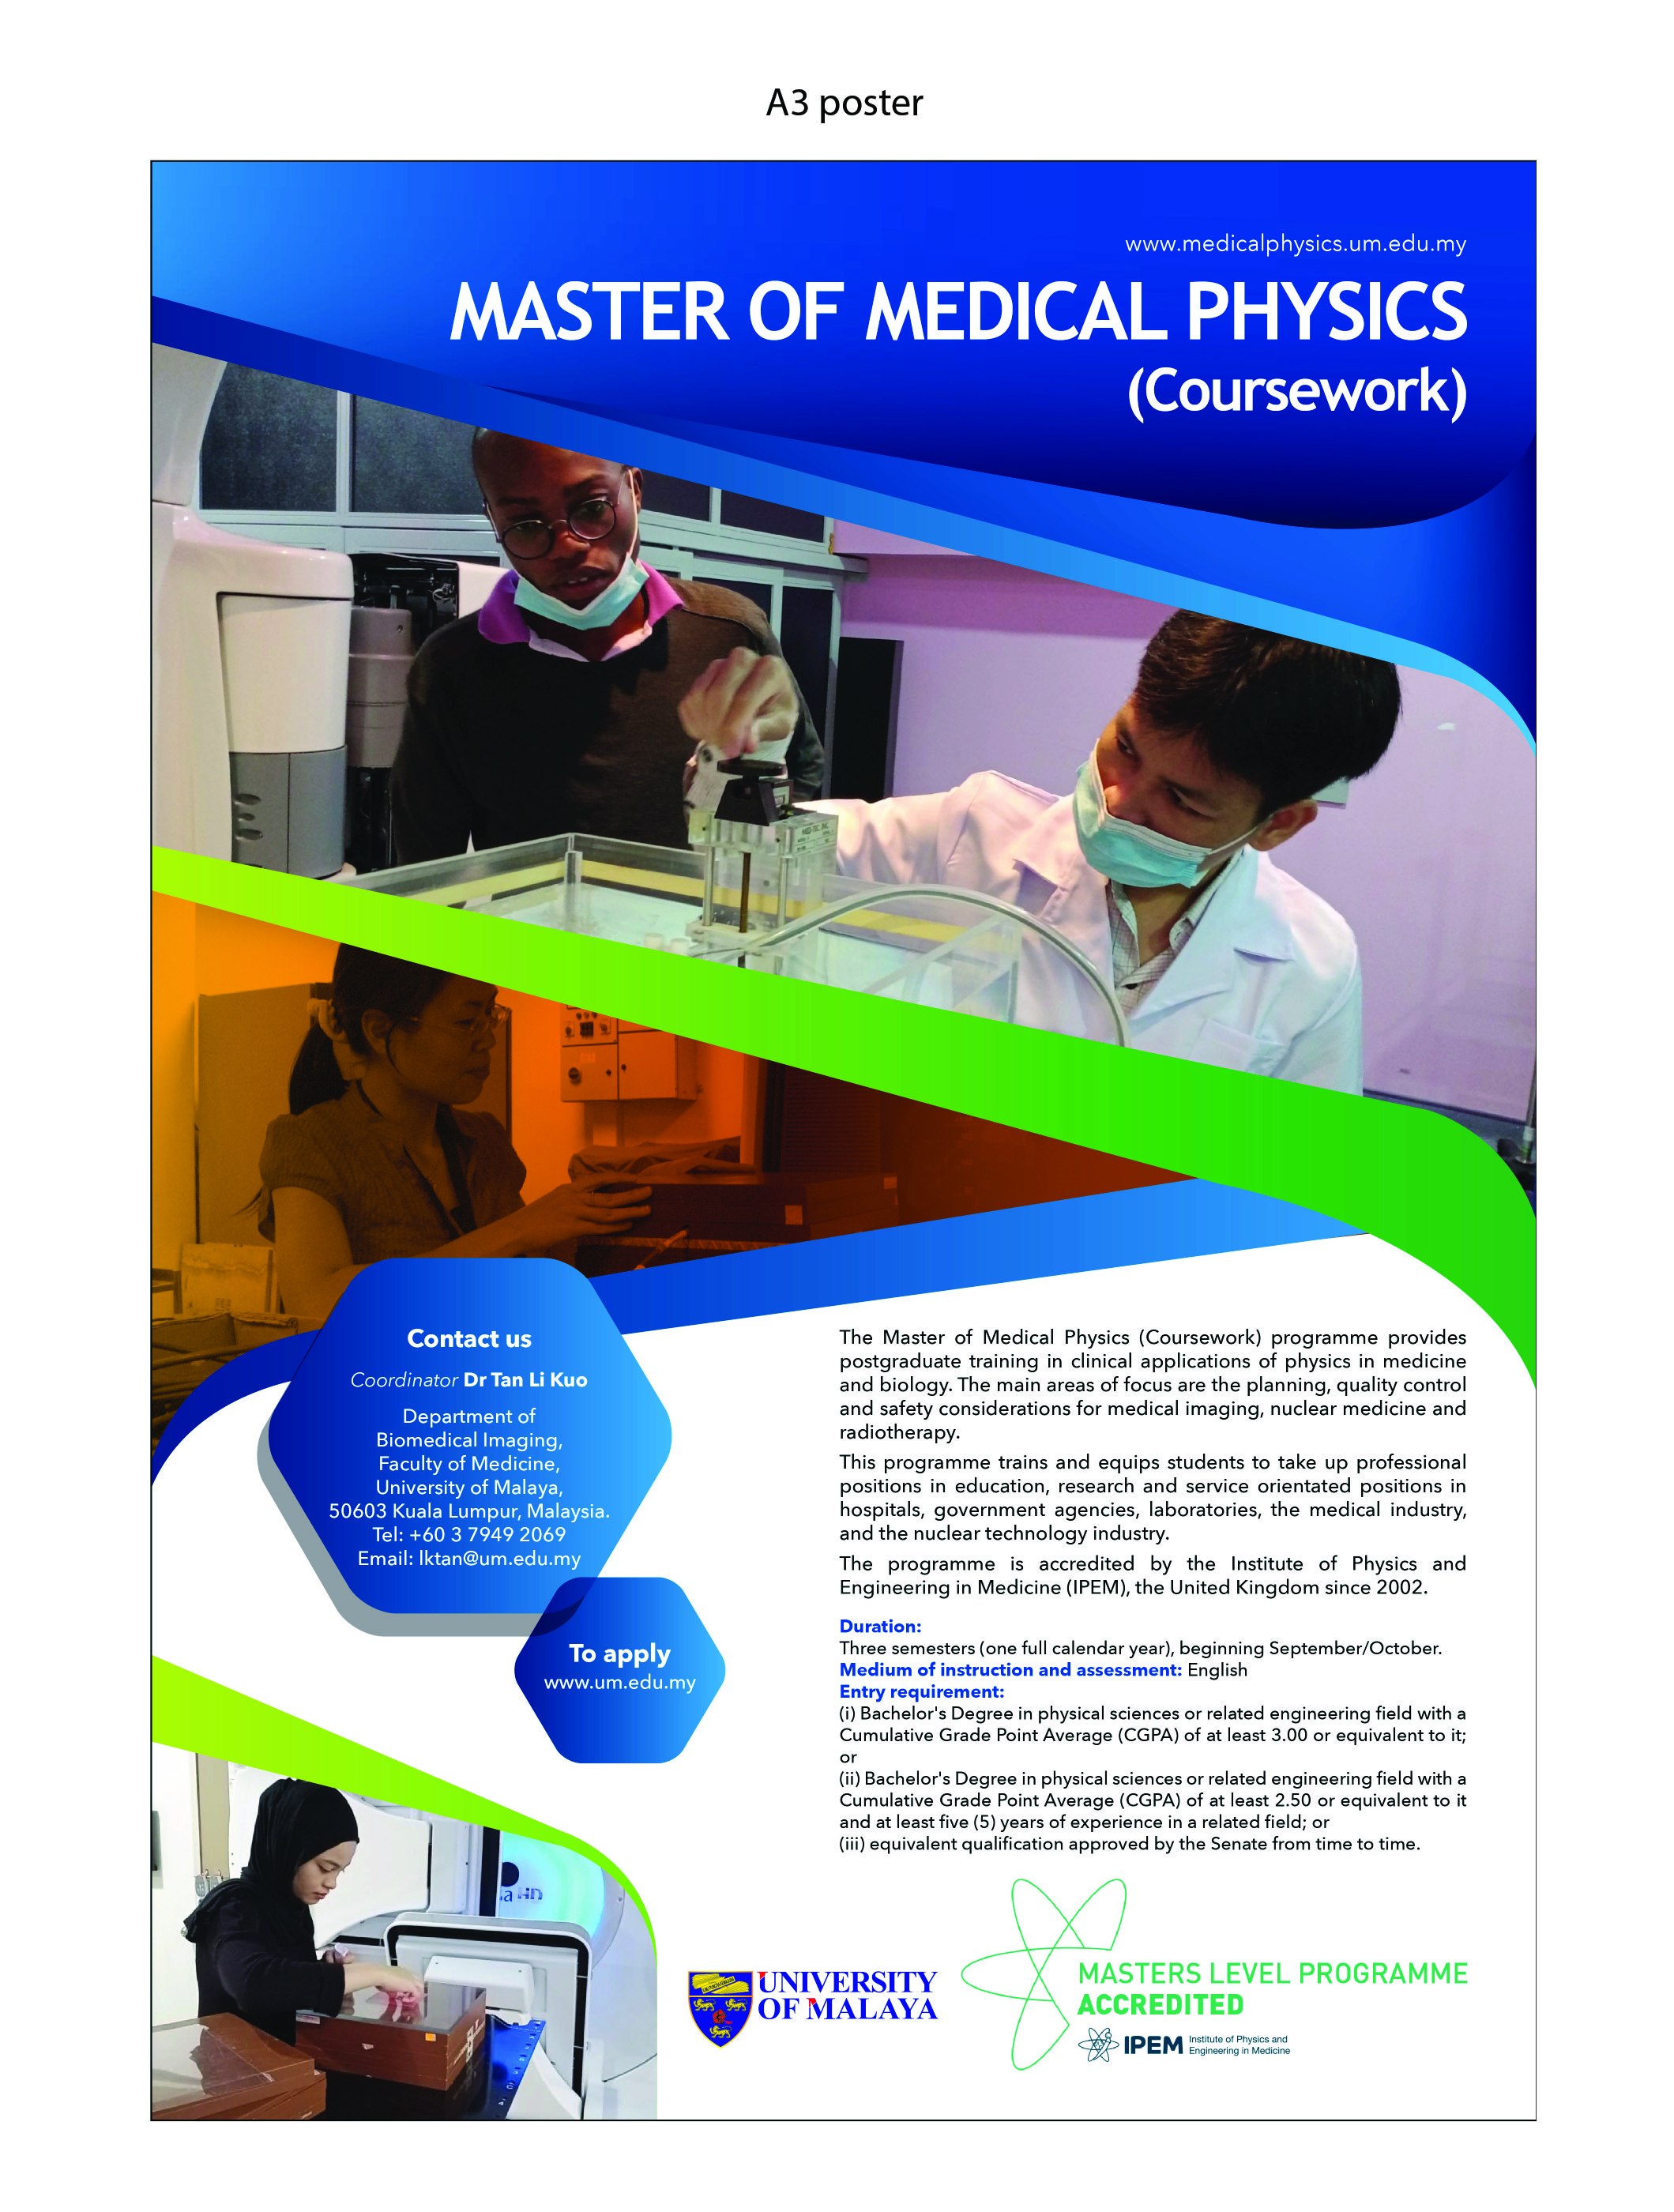 Welcome to MEDICAL PHYSICS - UNIVERSITY OF MALAYA website